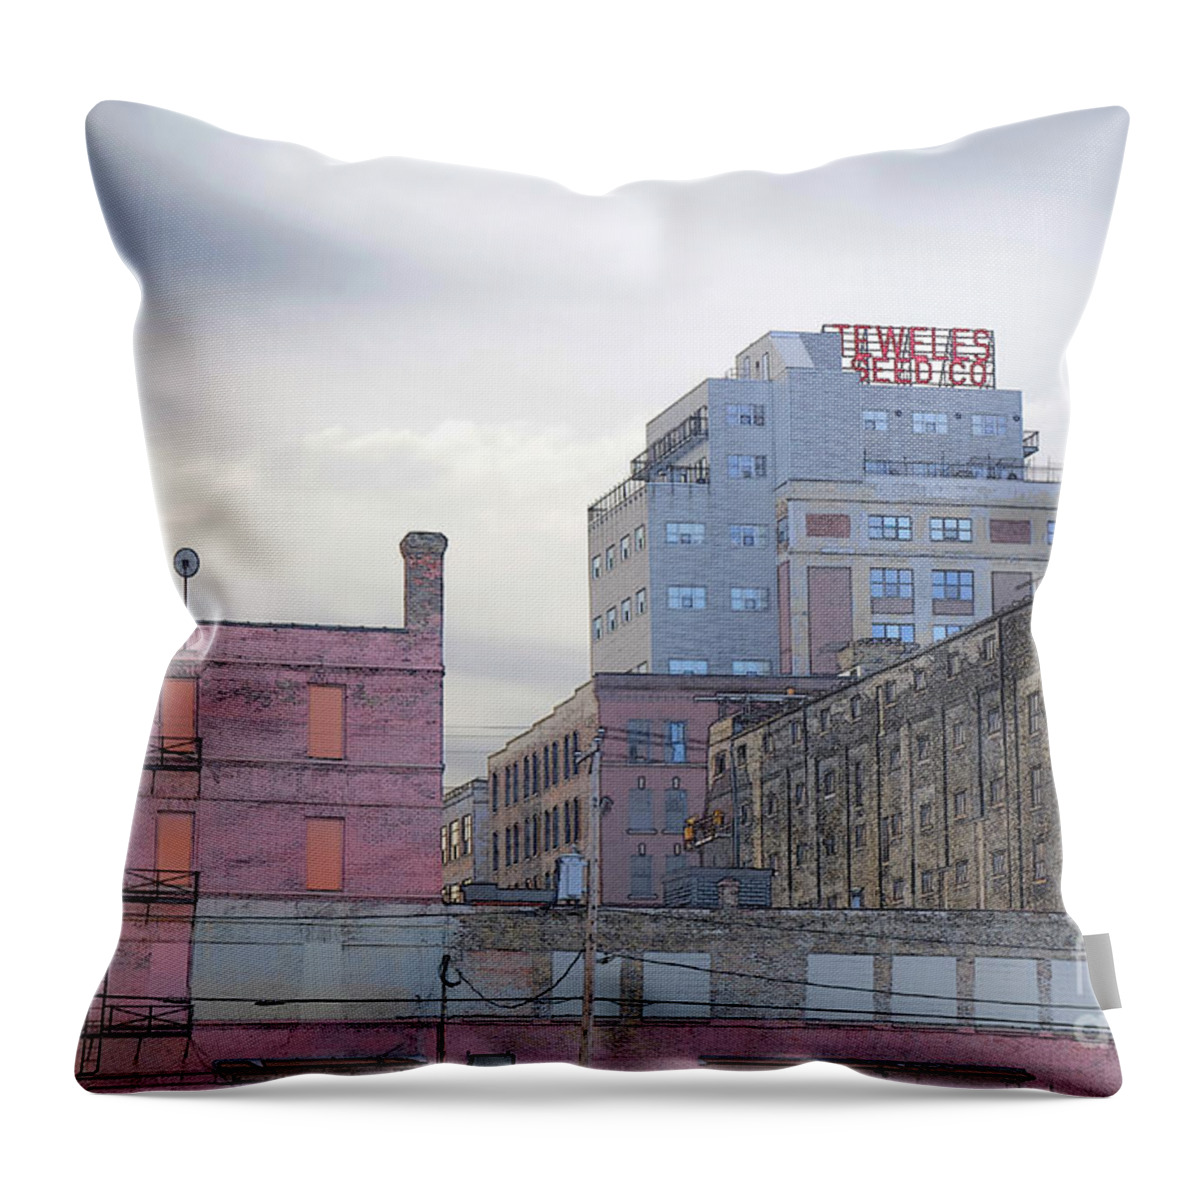 Teweles Throw Pillow featuring the digital art Teweles Seed Co by David Blank